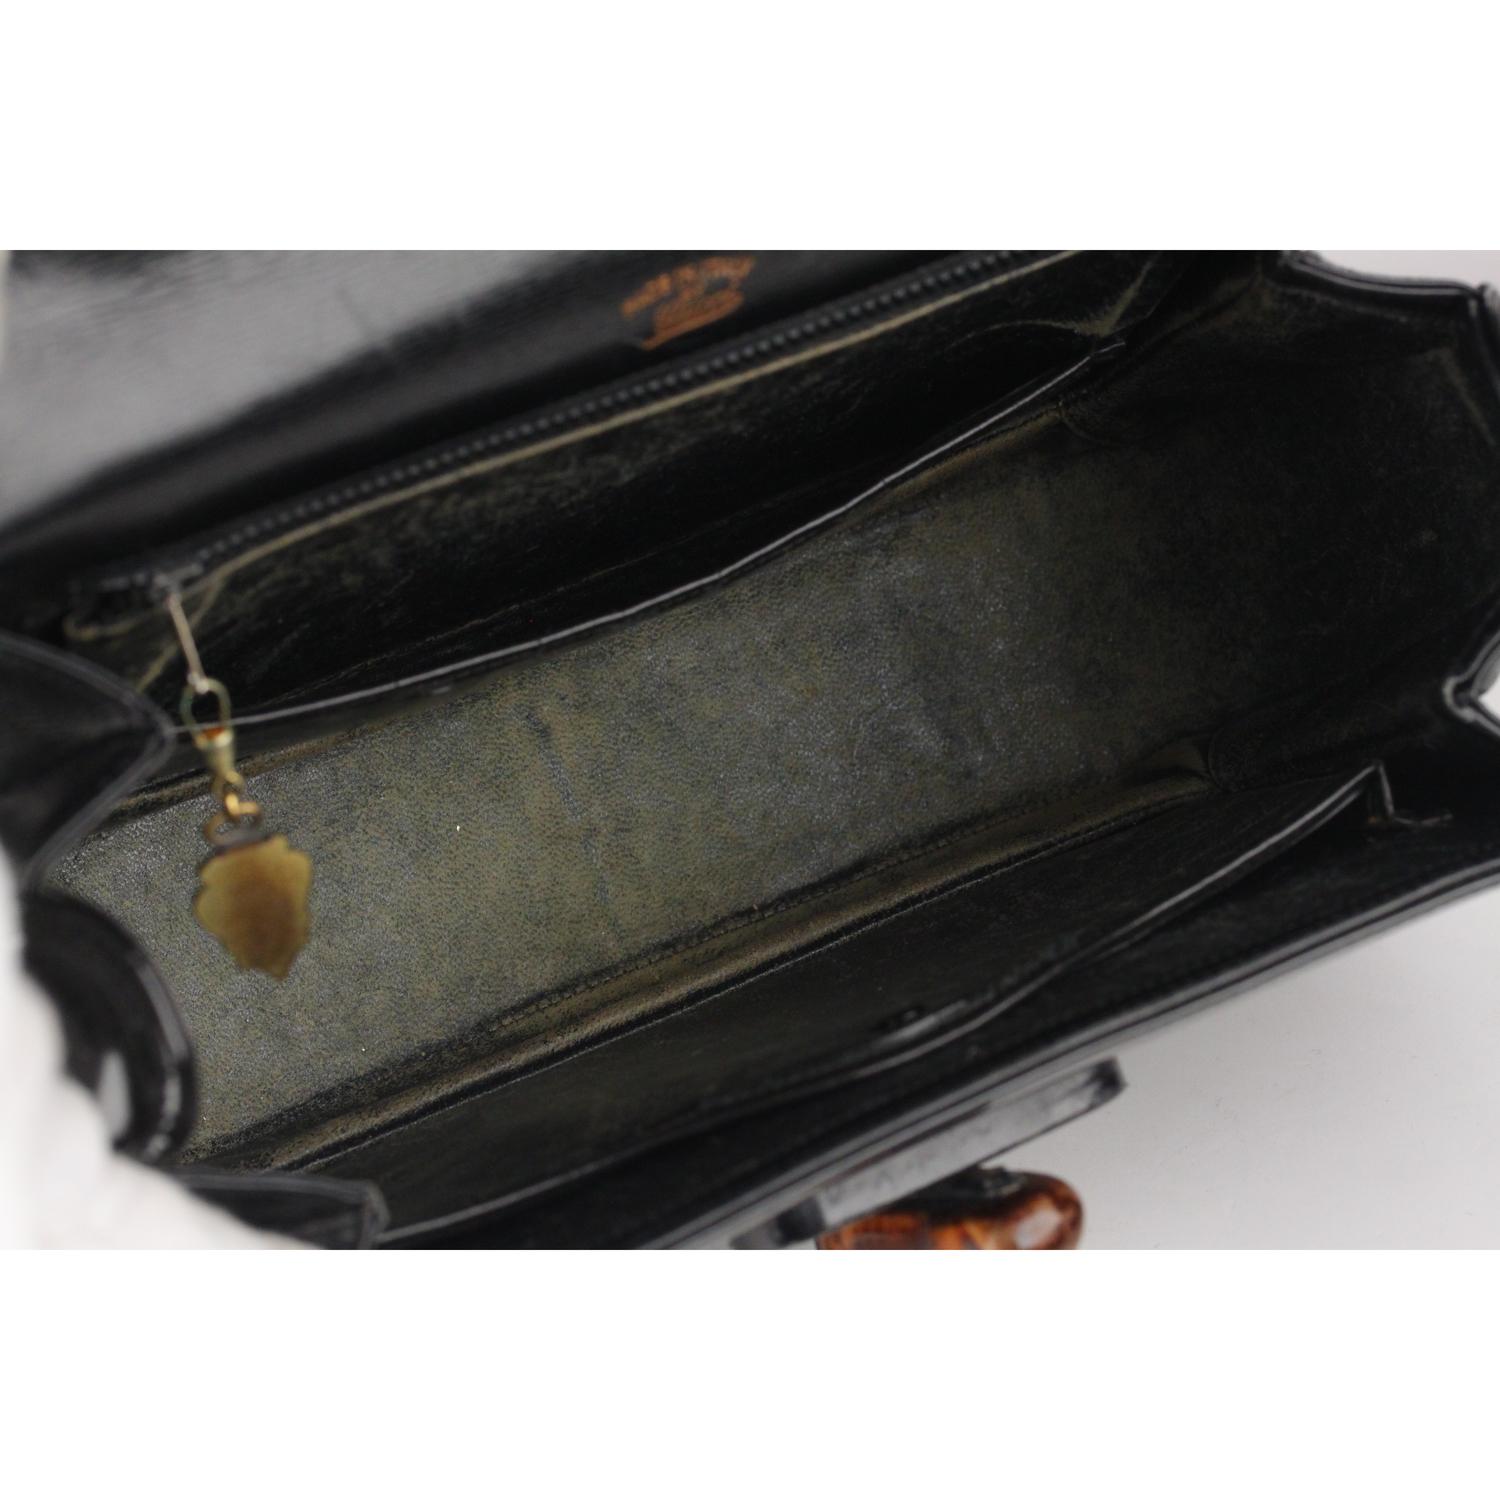 Gucci Vintage Black Patent Leather Bamboo Top Handle Bag 2